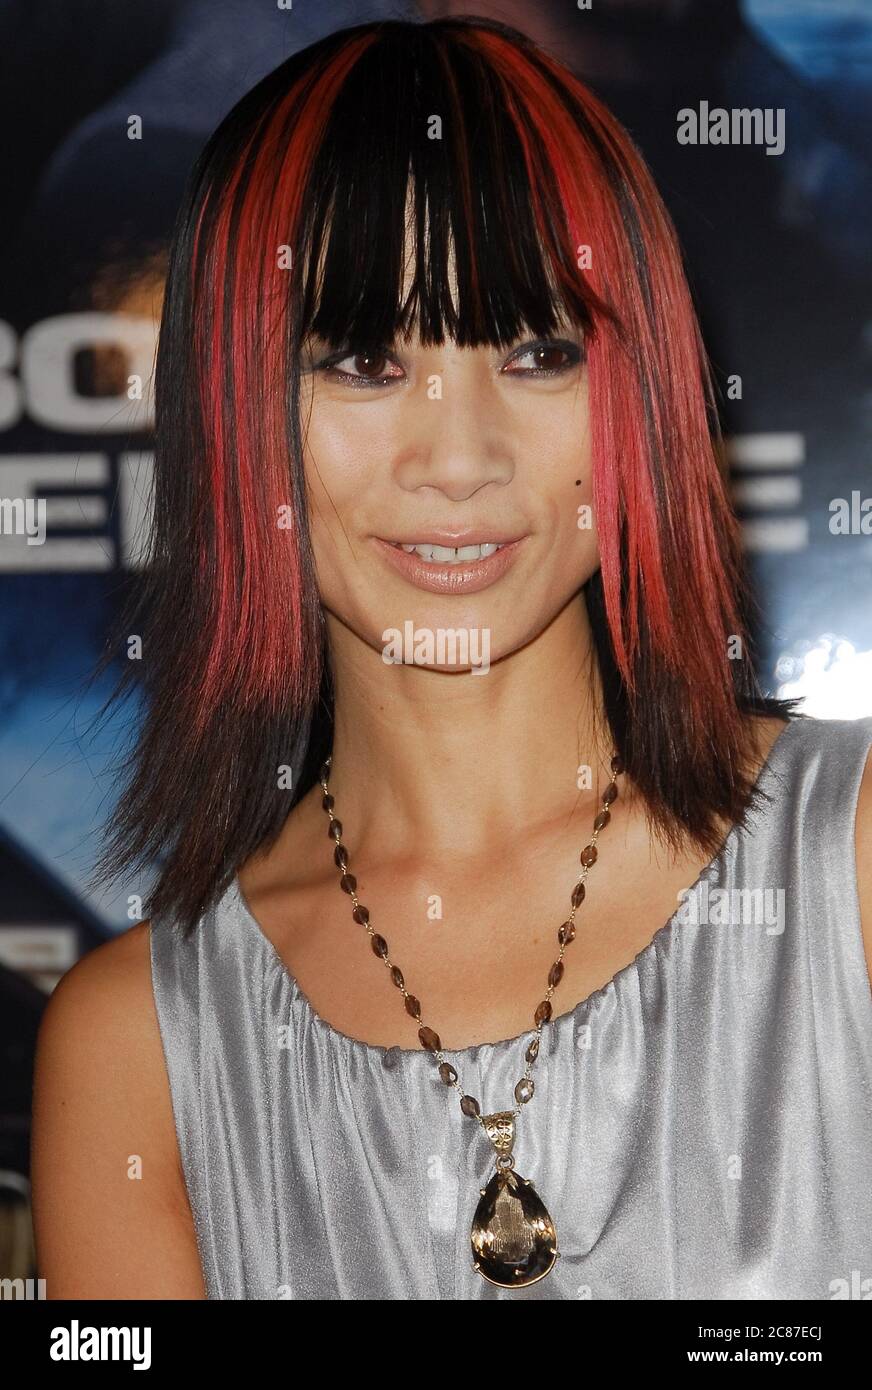 Bai Ling at the Premiere of 'Somebody Help Me' held at the Grauman's Chinese Theater in Hollywood, CA. The event took place on Thursday, October25, 2007. Photo by: SBM / PictureLux- File Reference # 34006-9476SBMPLX Stock Photo